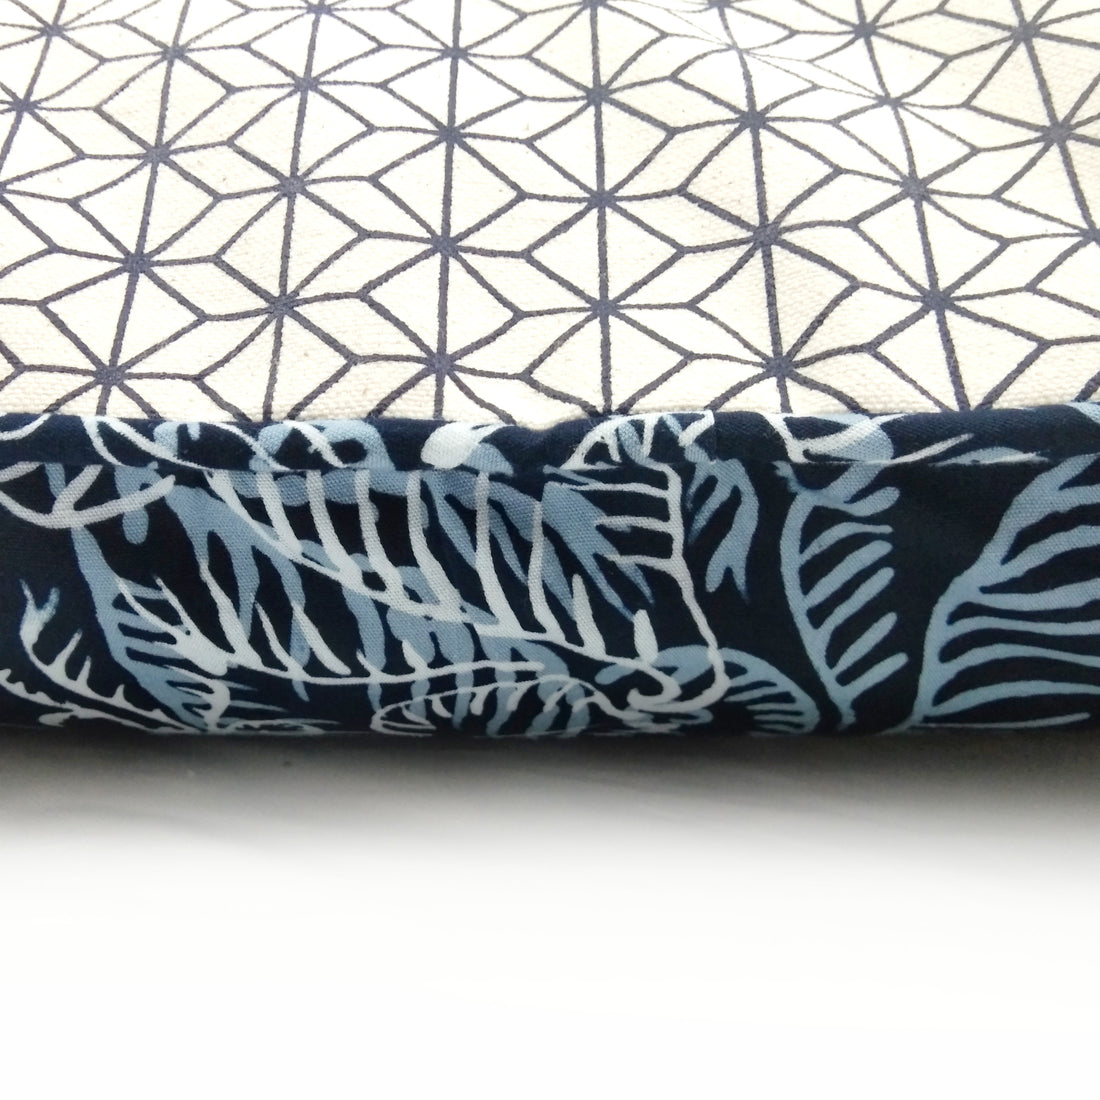 A close up photo of batik pillow cover in blue nautical fern pattern showing detail of the pattern